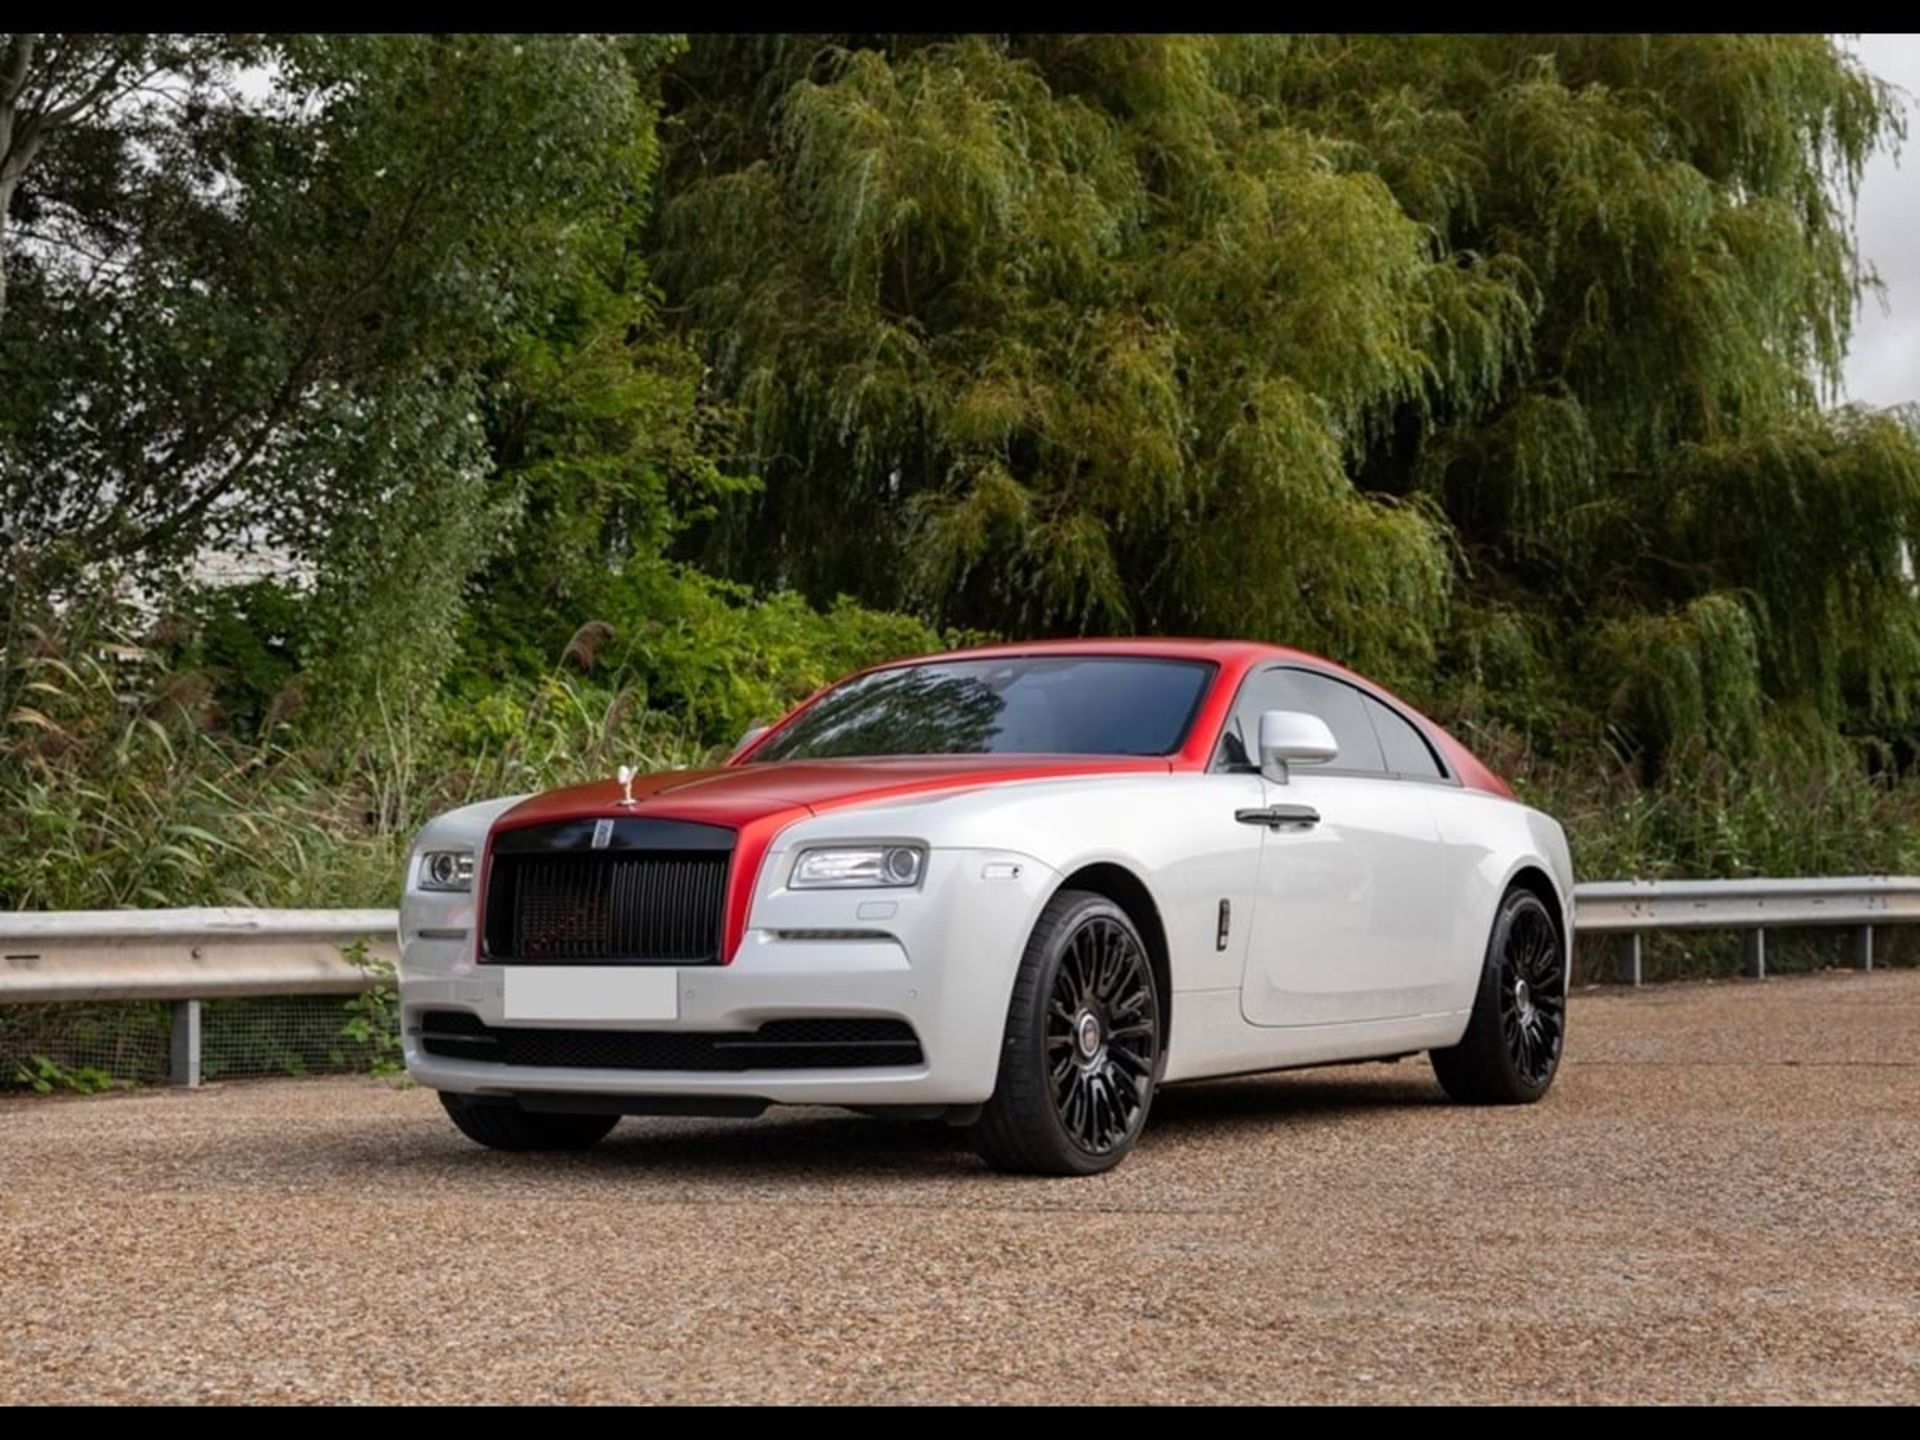 2016 Rolls-Royce Wraith 'Inspired by Fashion' - Image 20 of 21